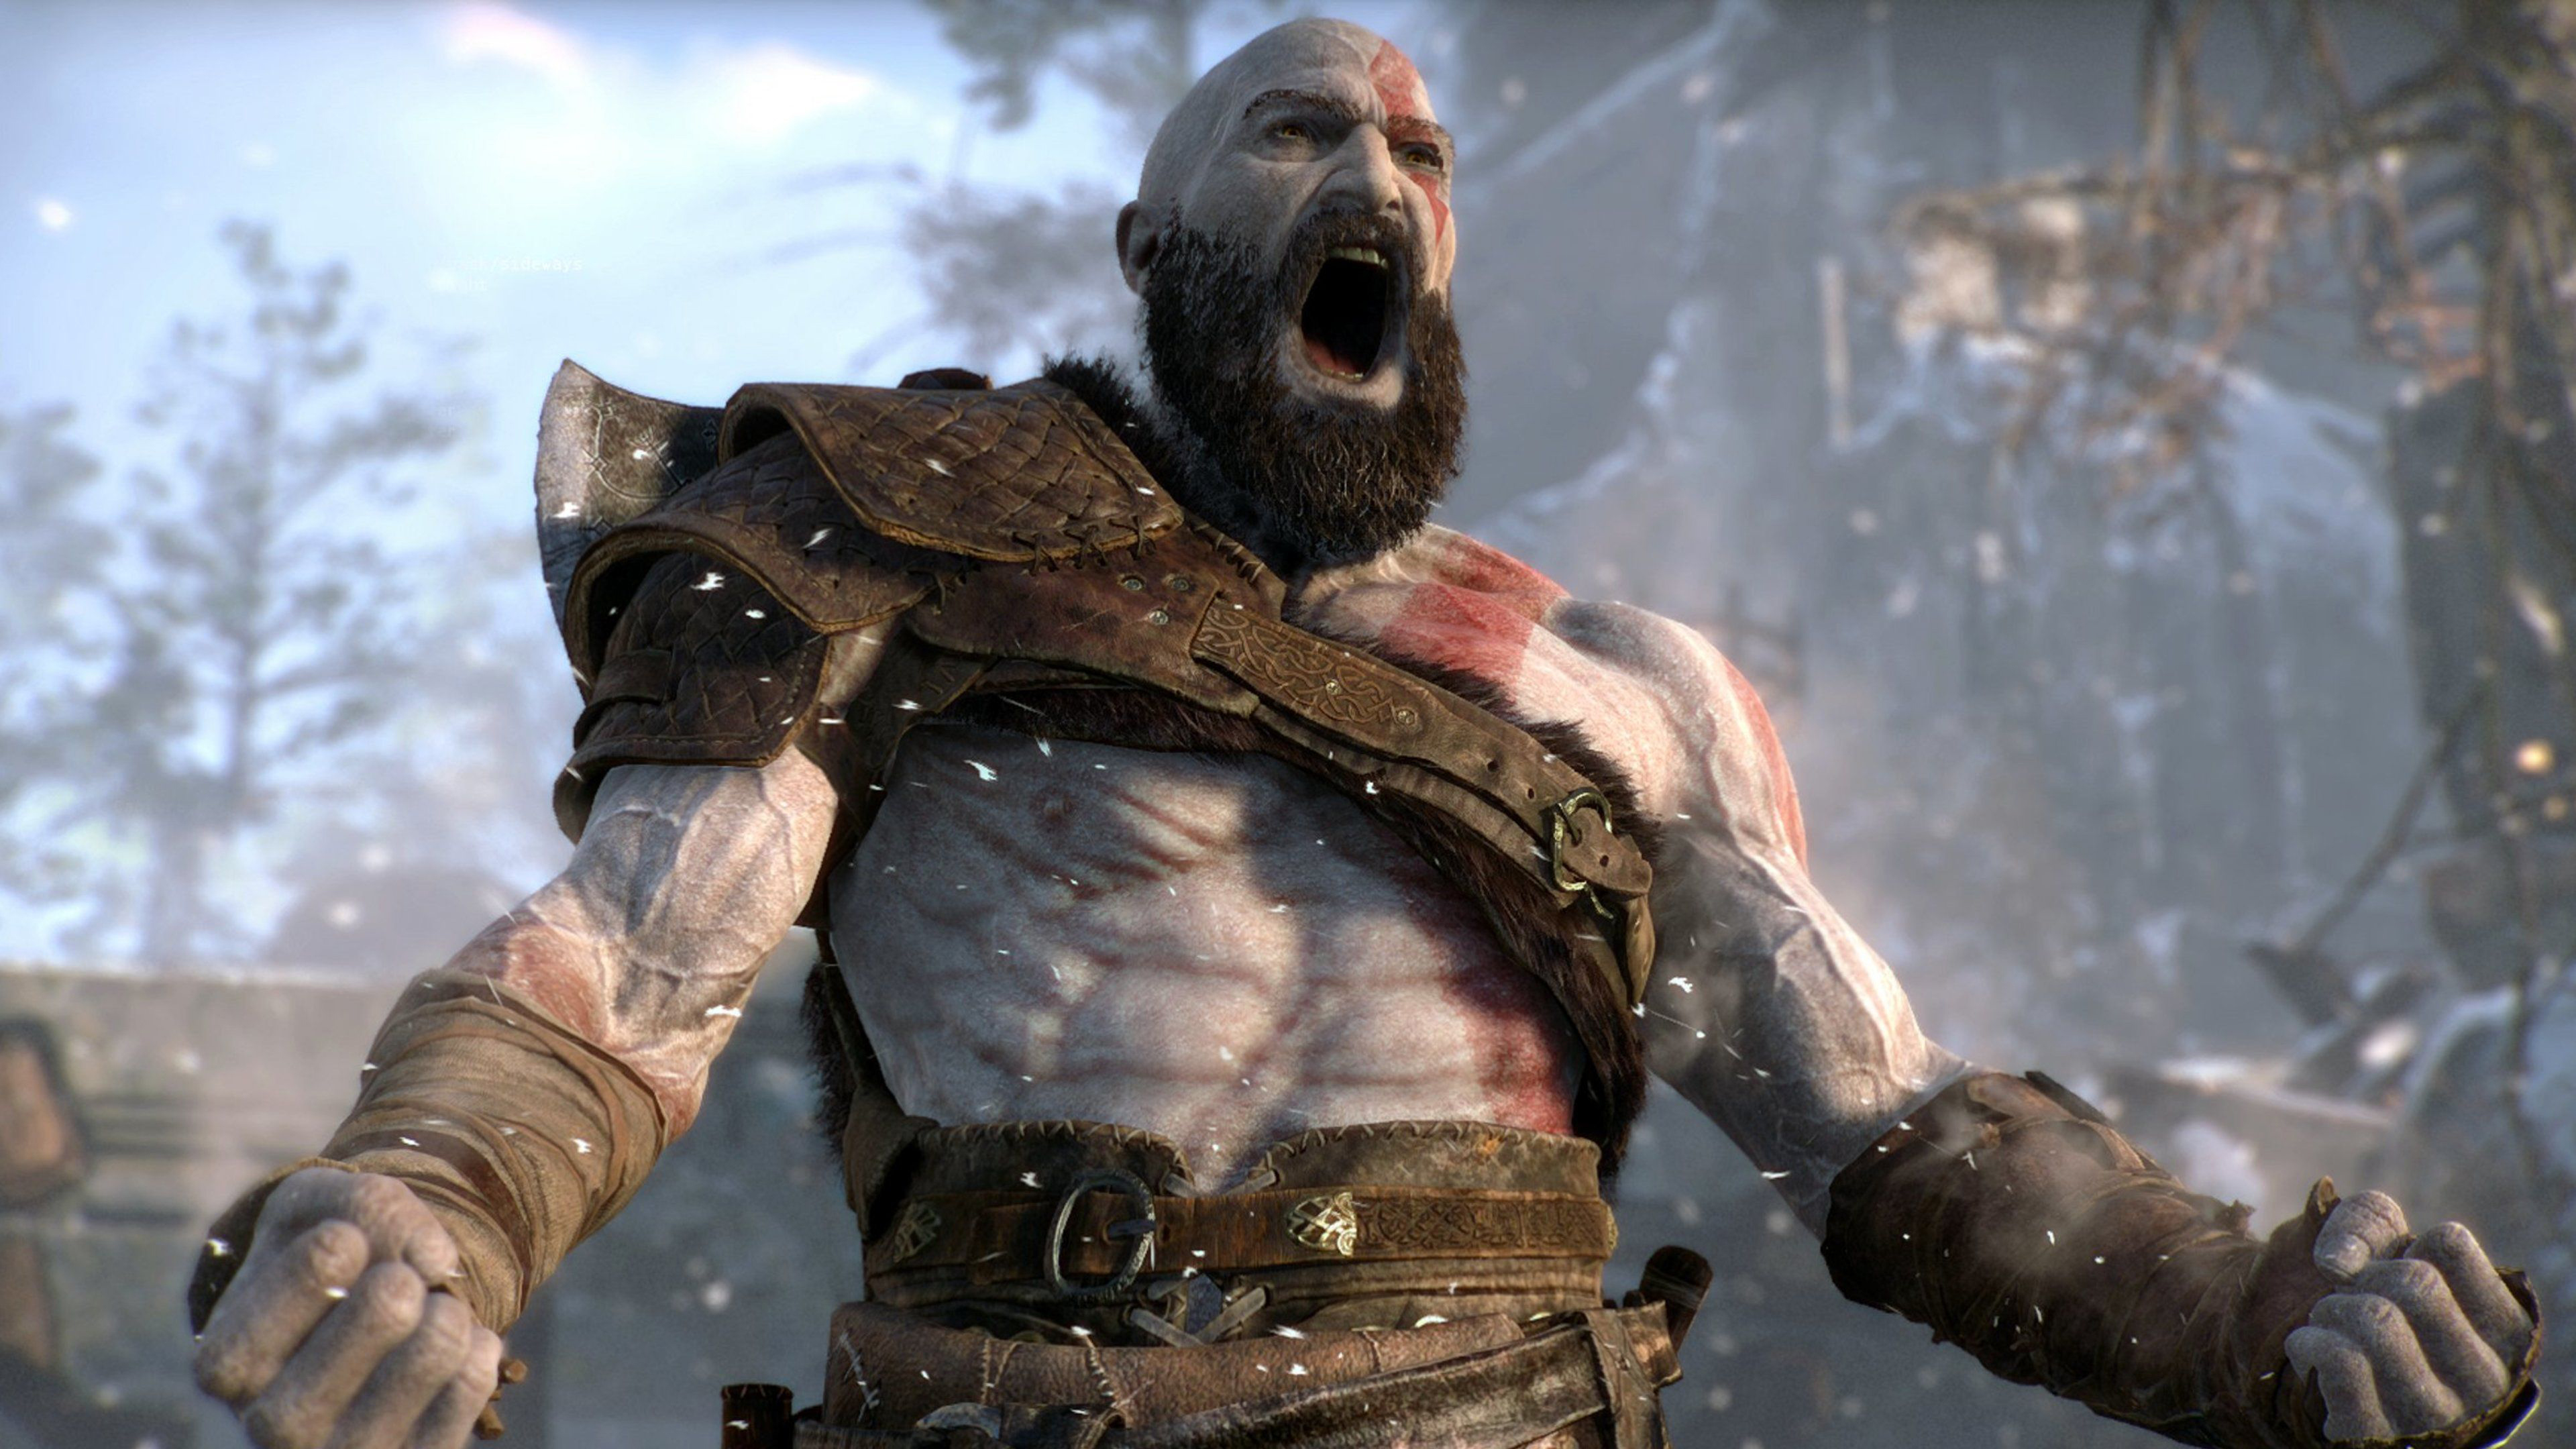 god of war for xbox